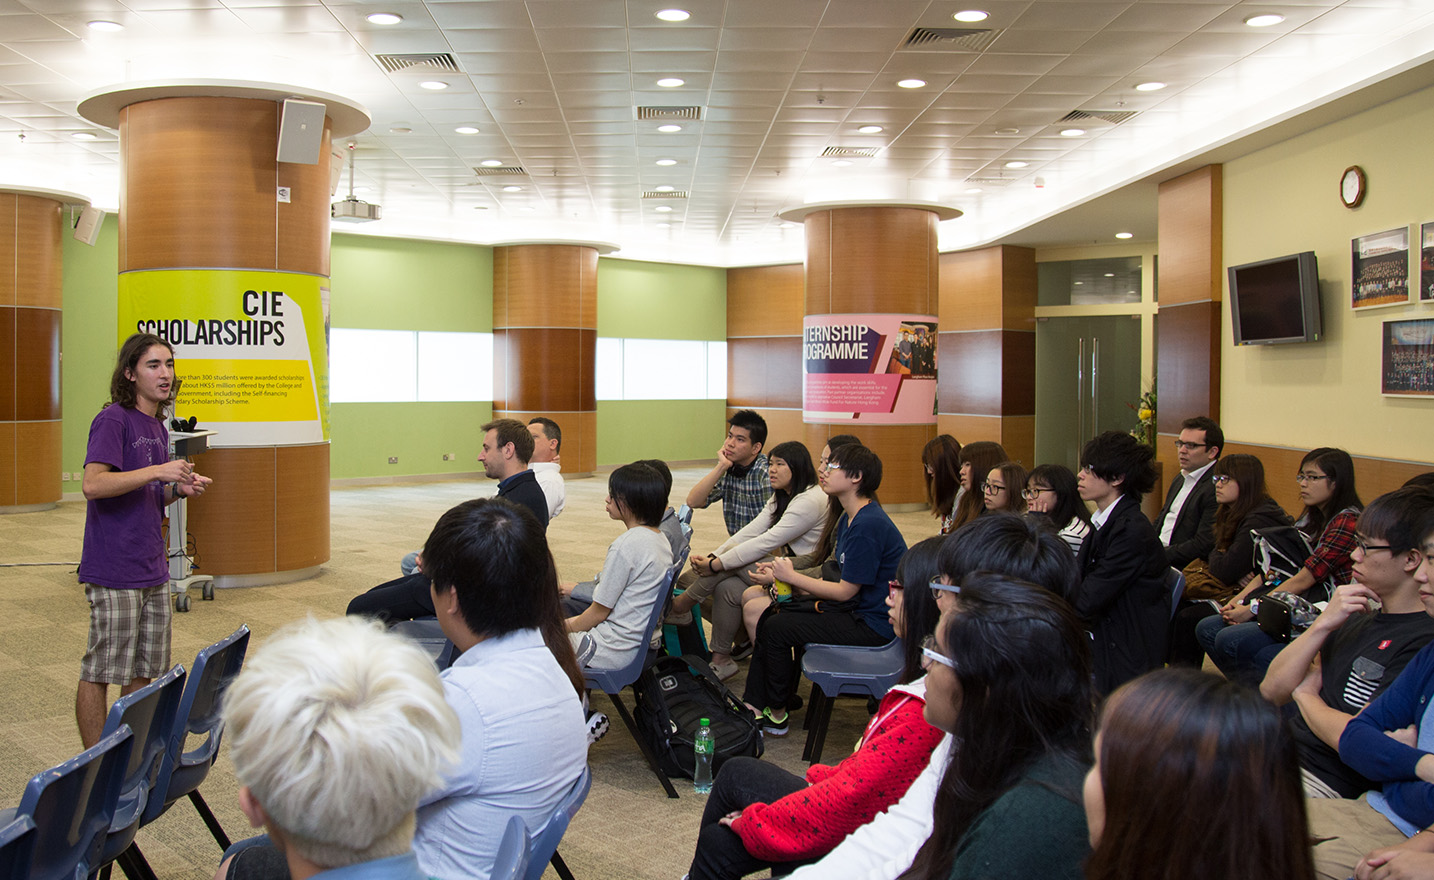 University of Edinburgh student Max Dunn was invited to share his experience studying in the UK and Hong Kong.